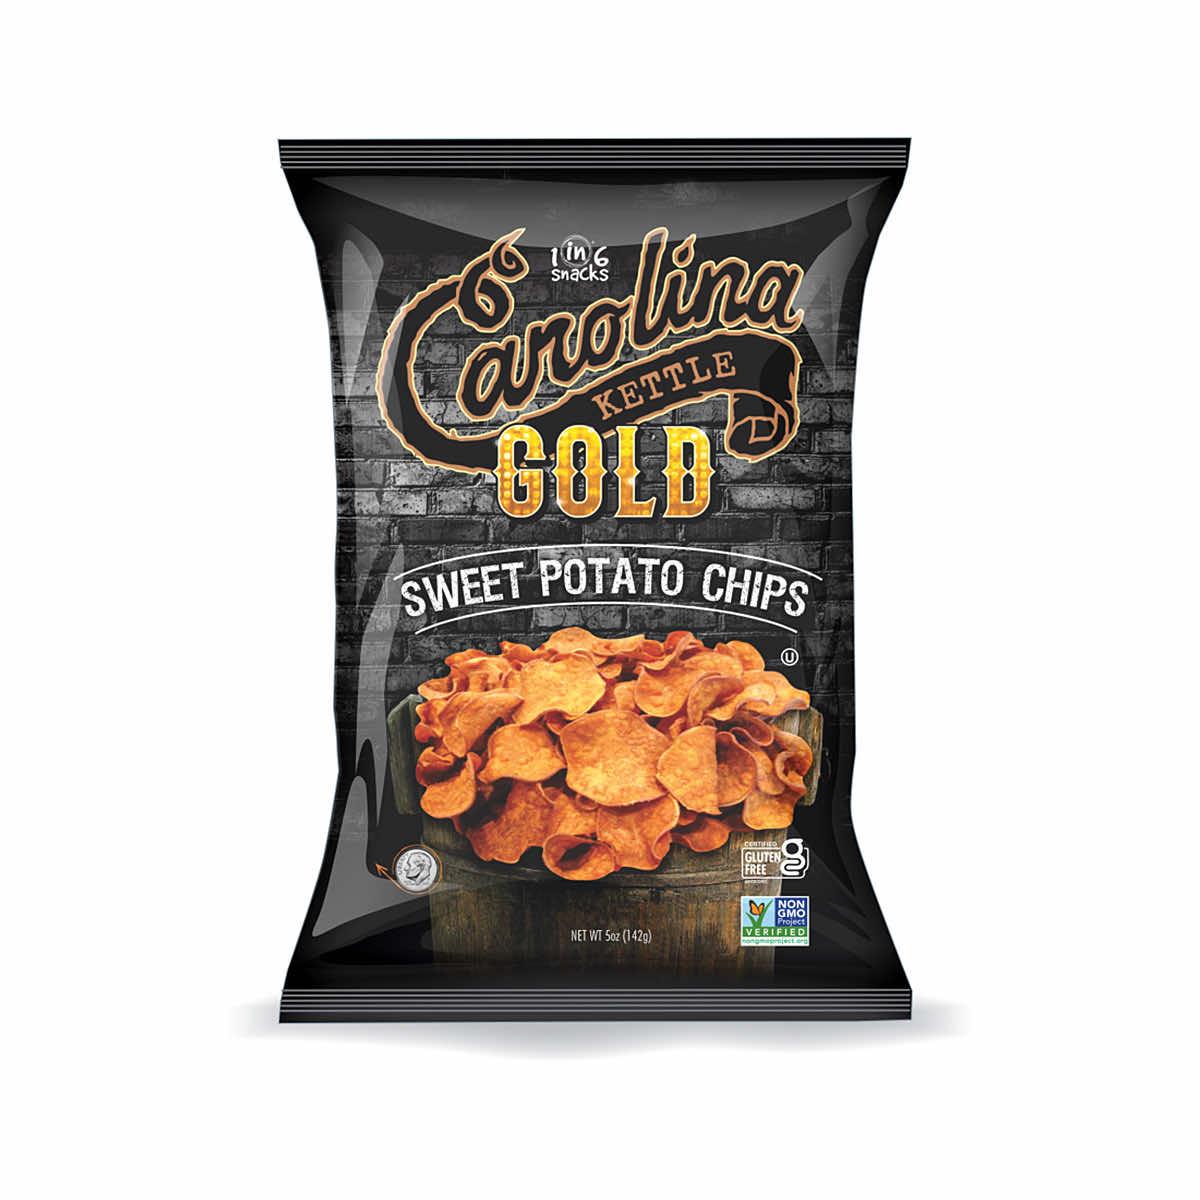  Kettle Cooked Sweet Potato Chips - 2 Ounce